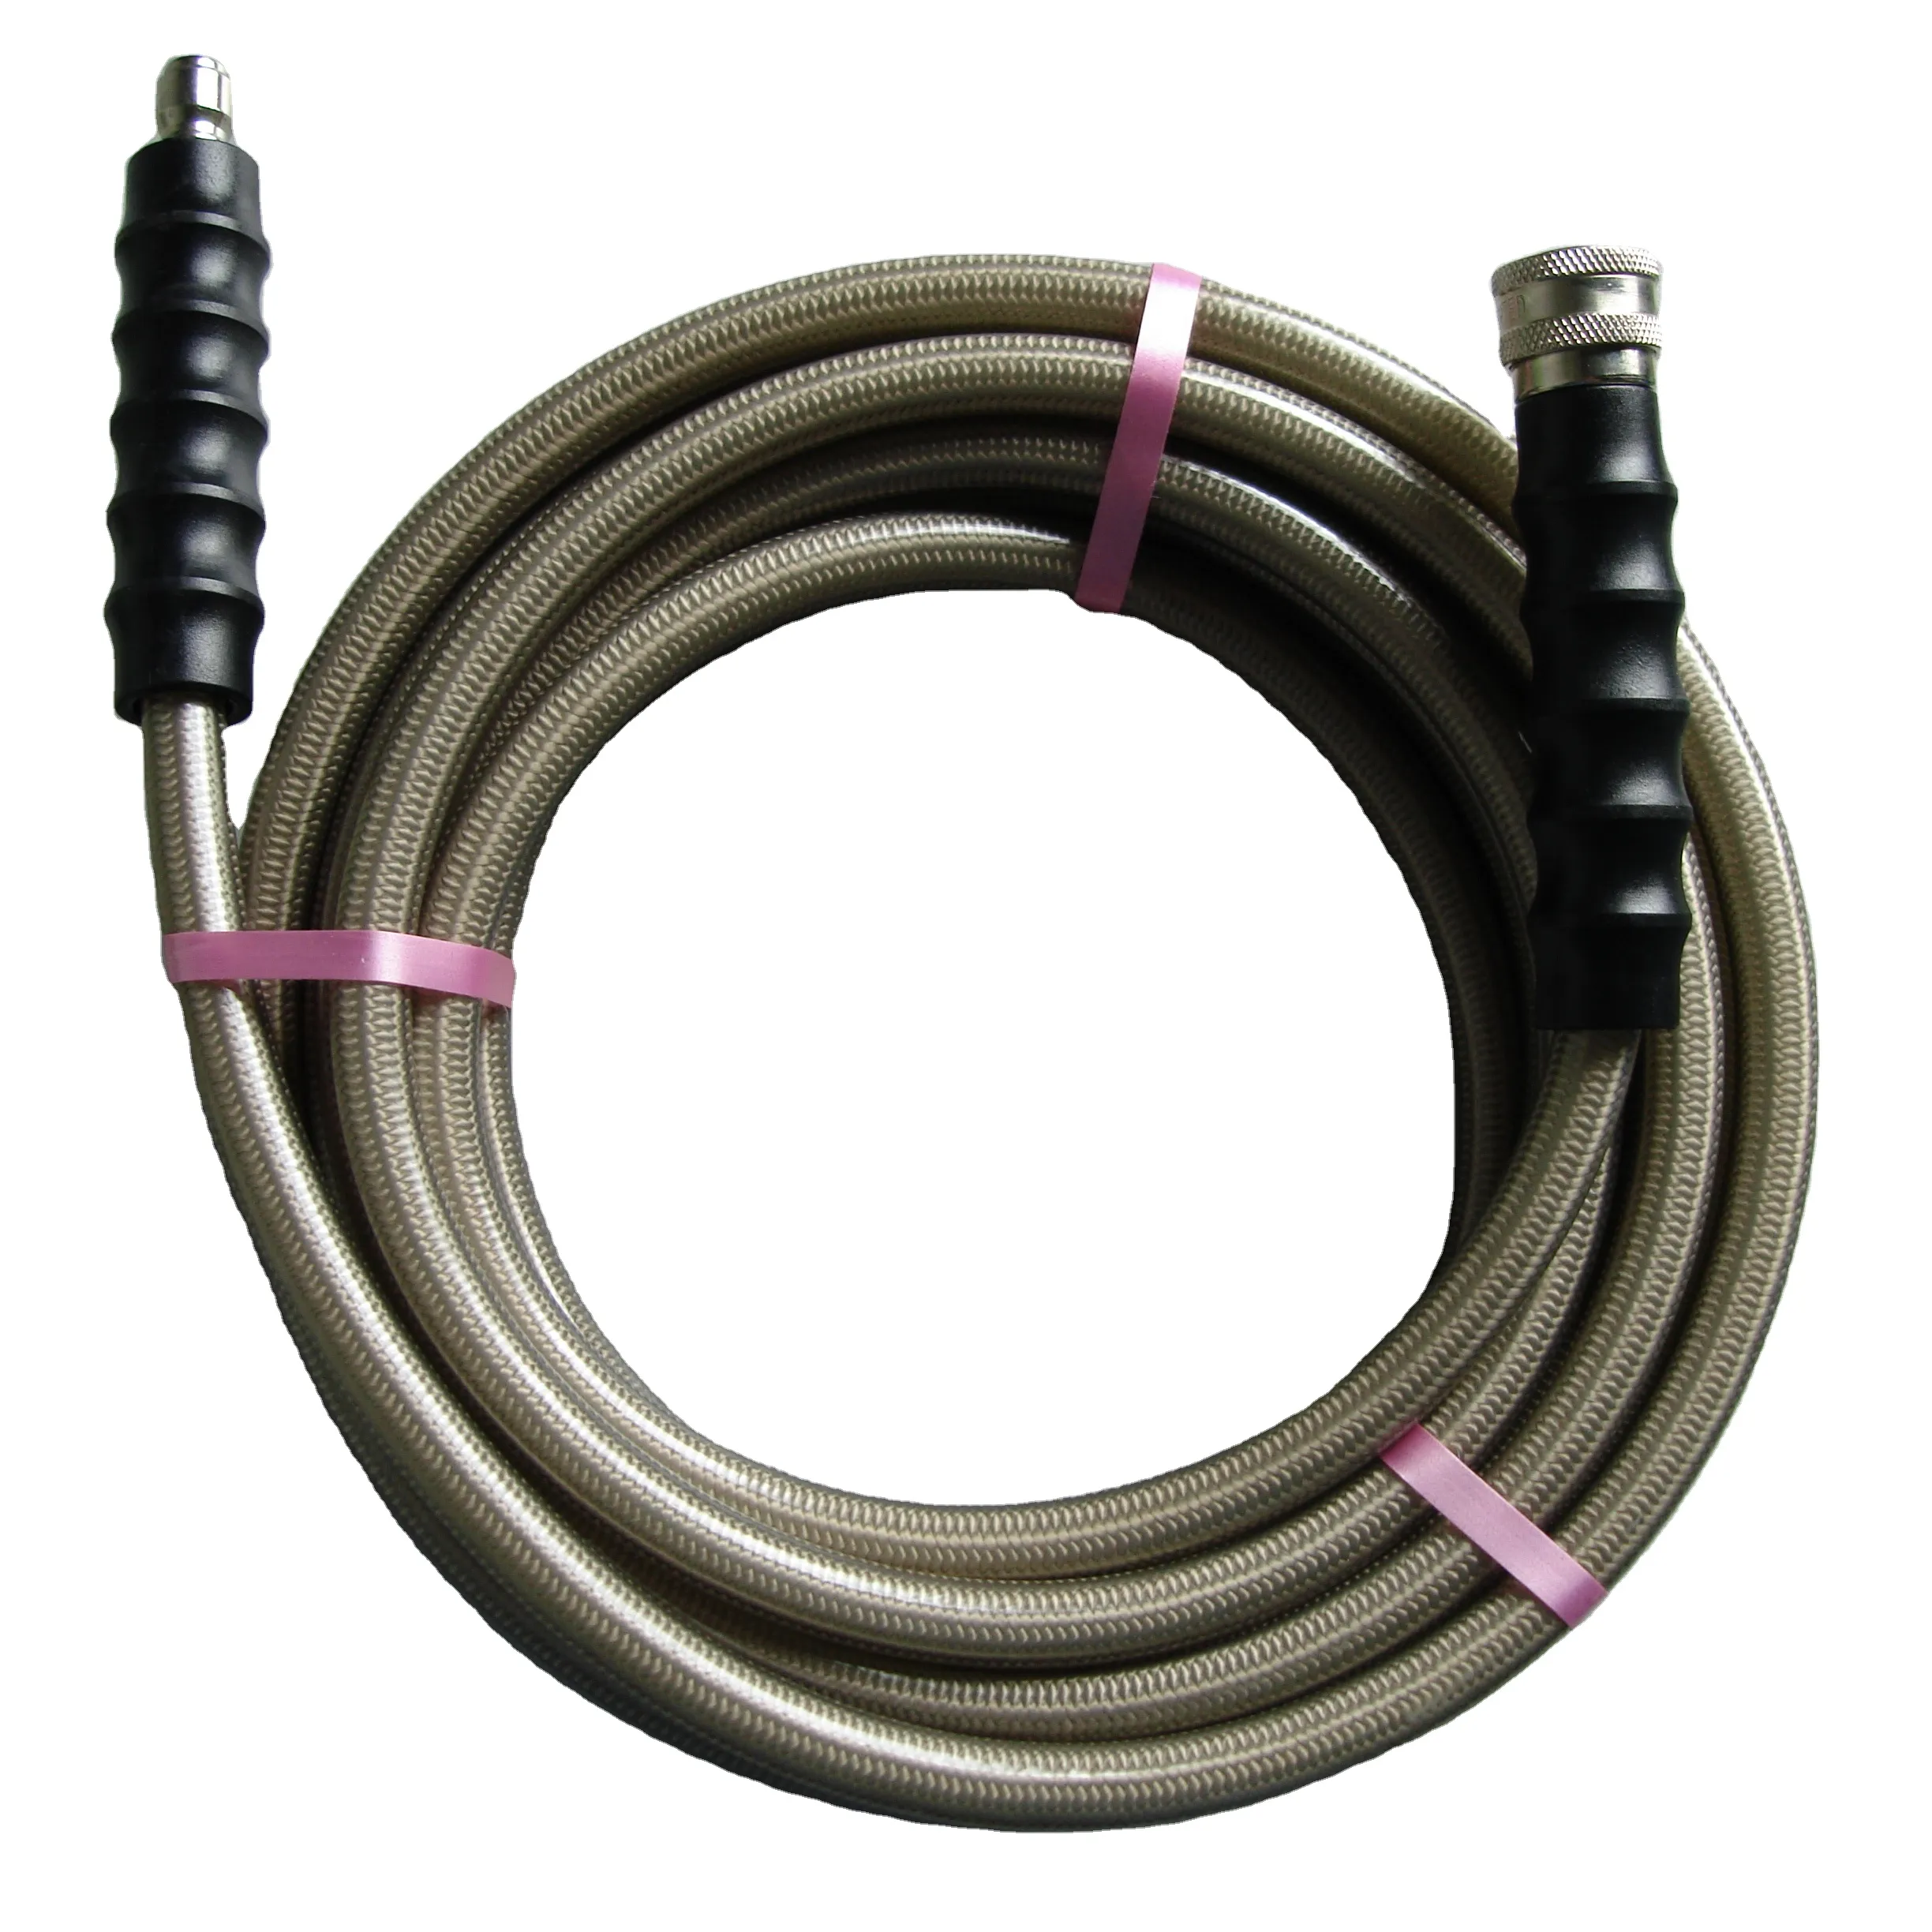 Grey high pressure rubber jet water wash hose for car washing machine with quick connect fittings